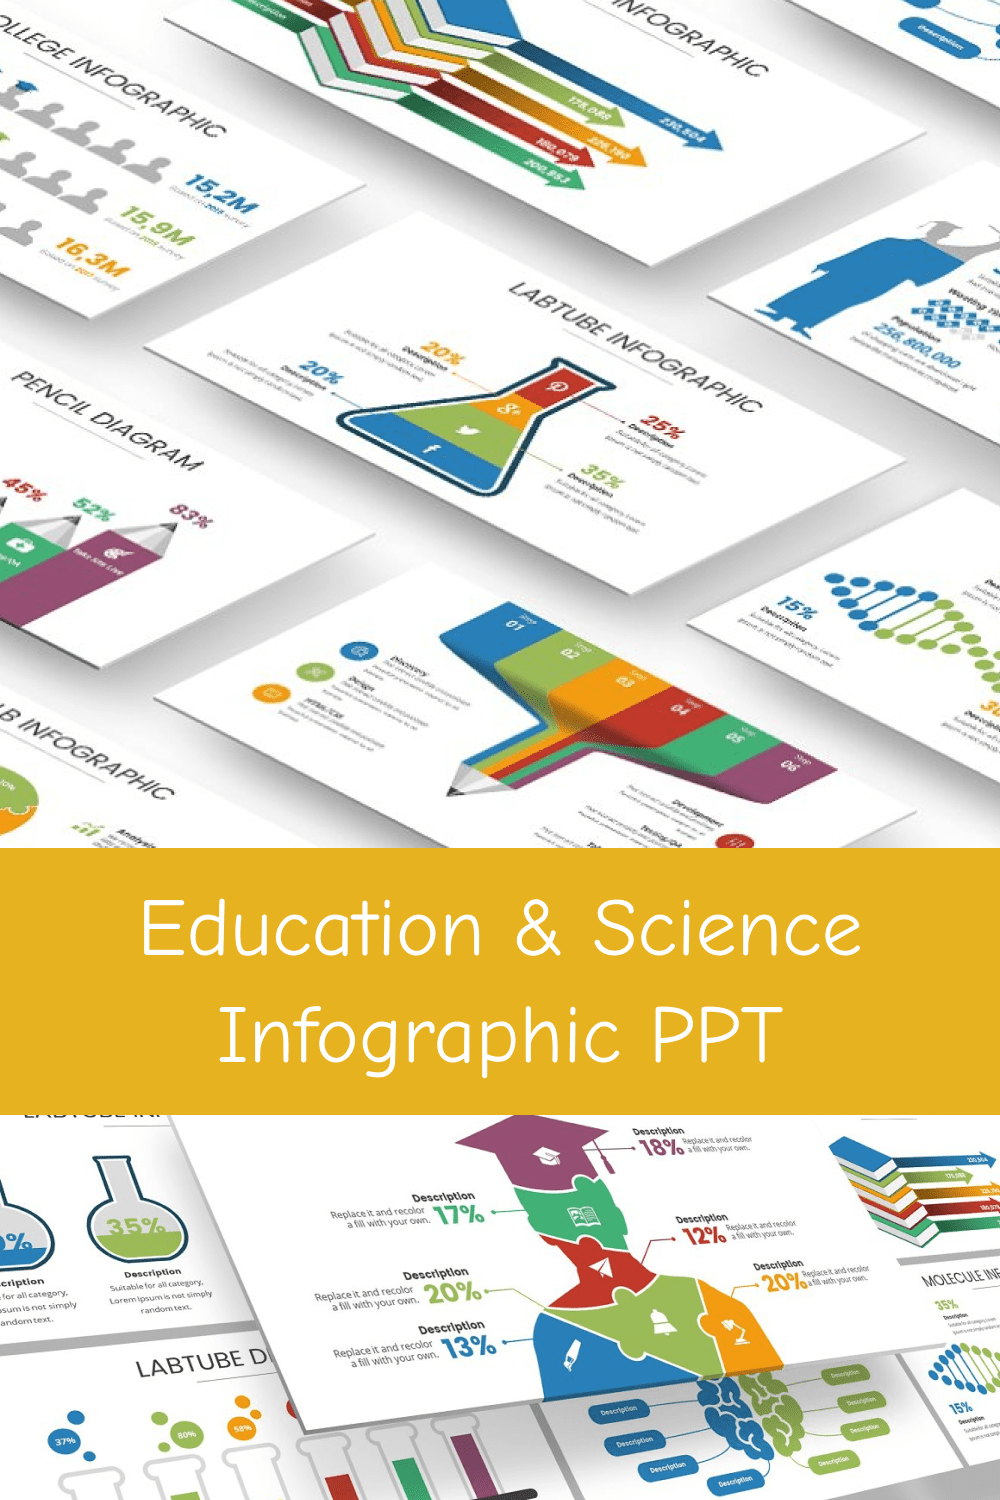 education science infographic ppt pinterest image.